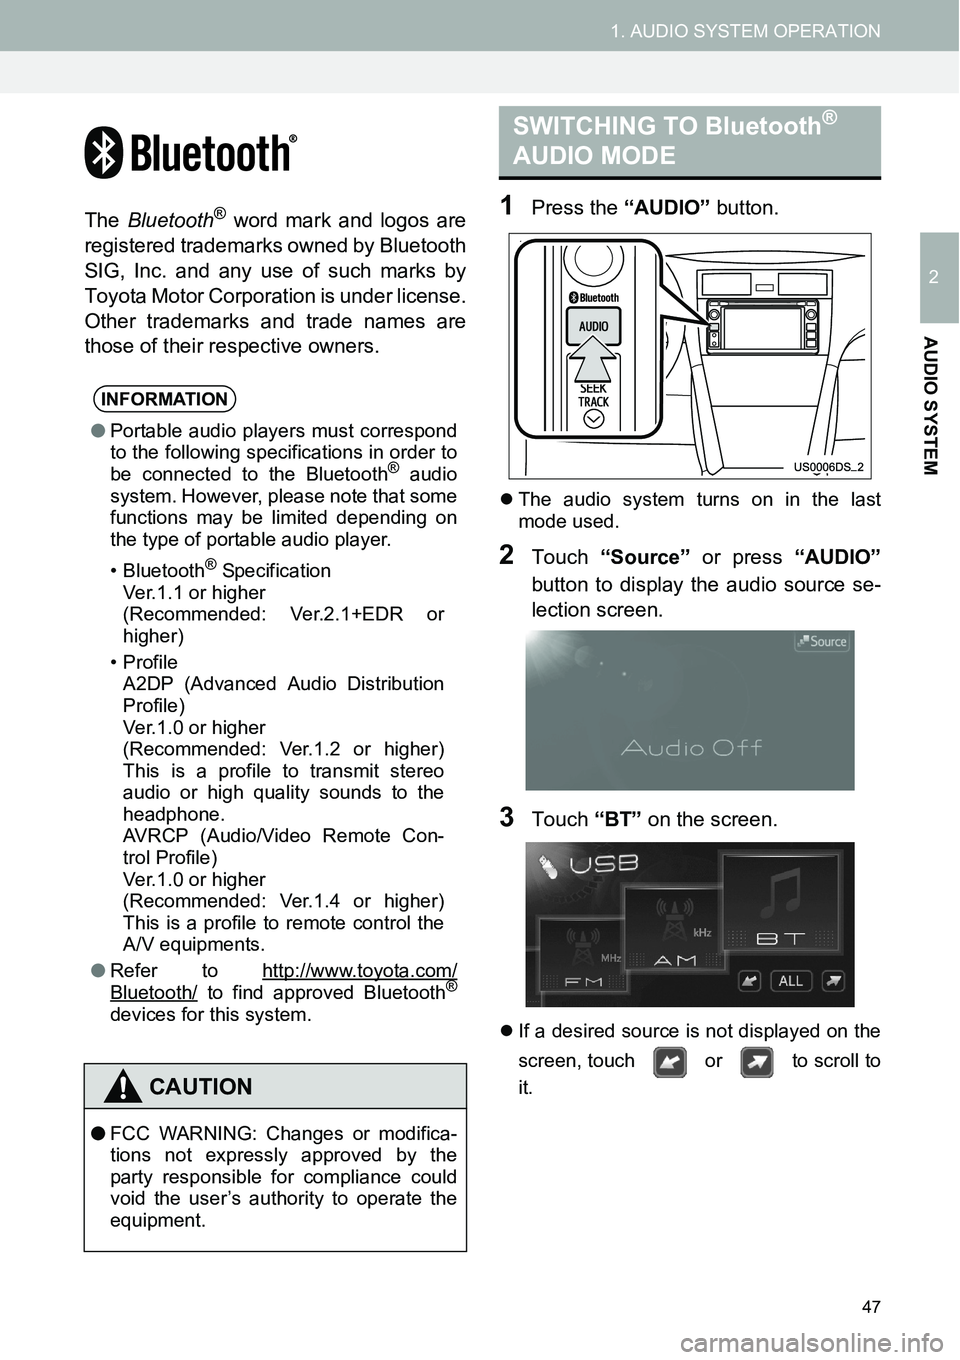 TOYOTA xD 2014  Accessories, Audio & Navigation (in English) 47
1. AUDIO SYSTEM OPERATION
2
AUDIO SYSTEM
The Bluetooth® word mark and logos are
registered trademarks owned by Bluetooth
SIG, Inc. and any use of such marks by
Toyota Motor Corporation is under li